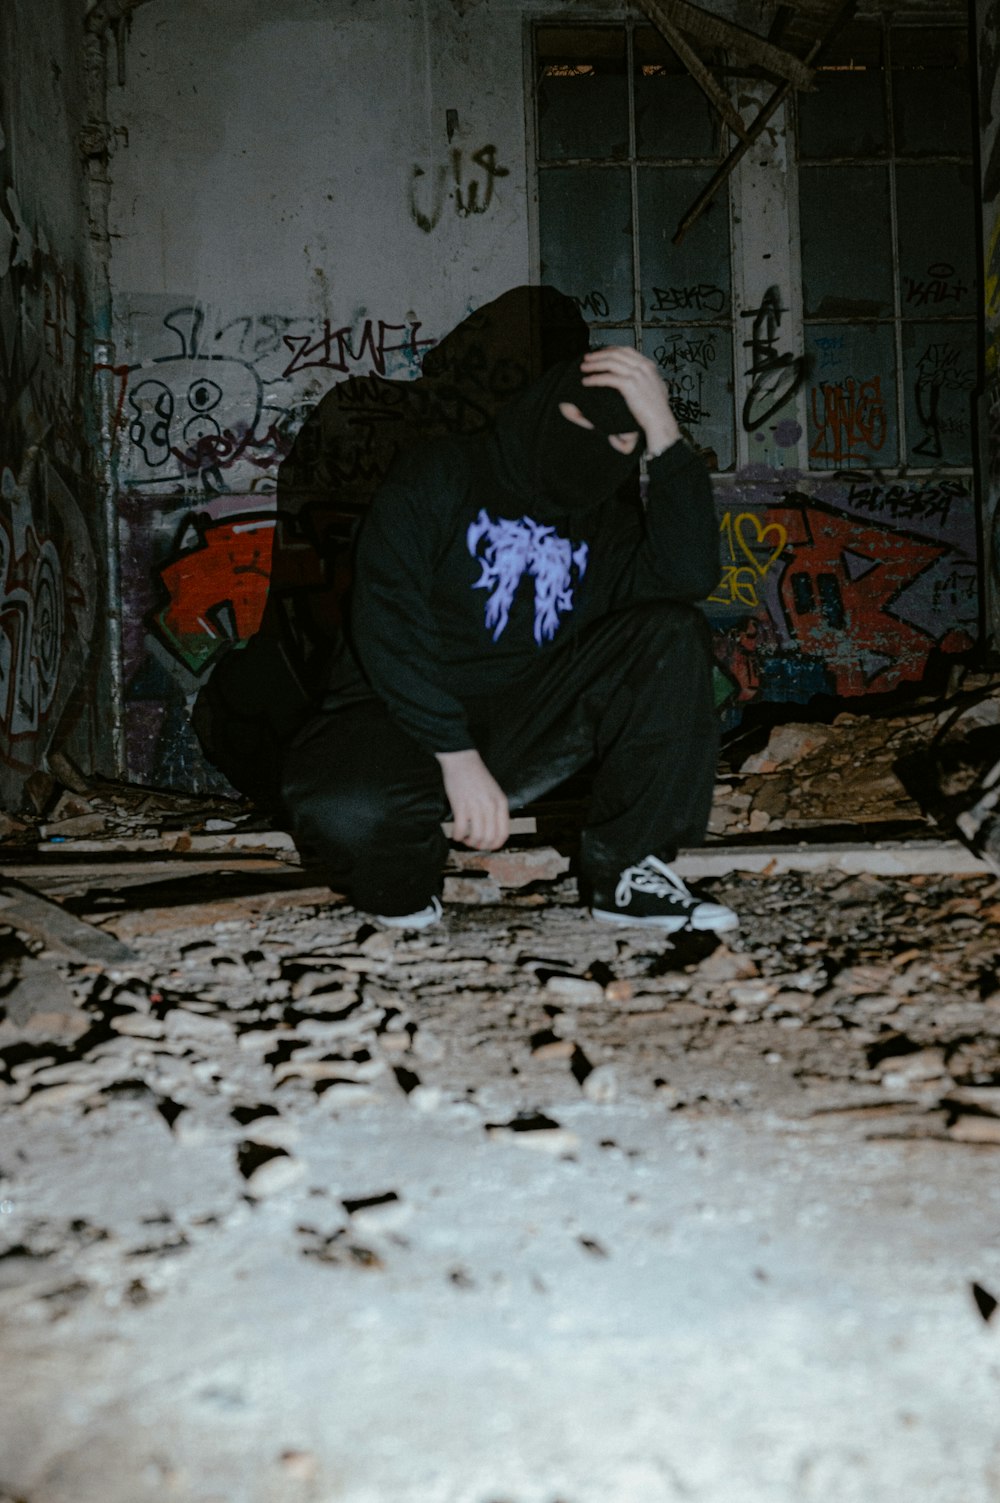 a person kneeling down in a room with graffiti on the walls